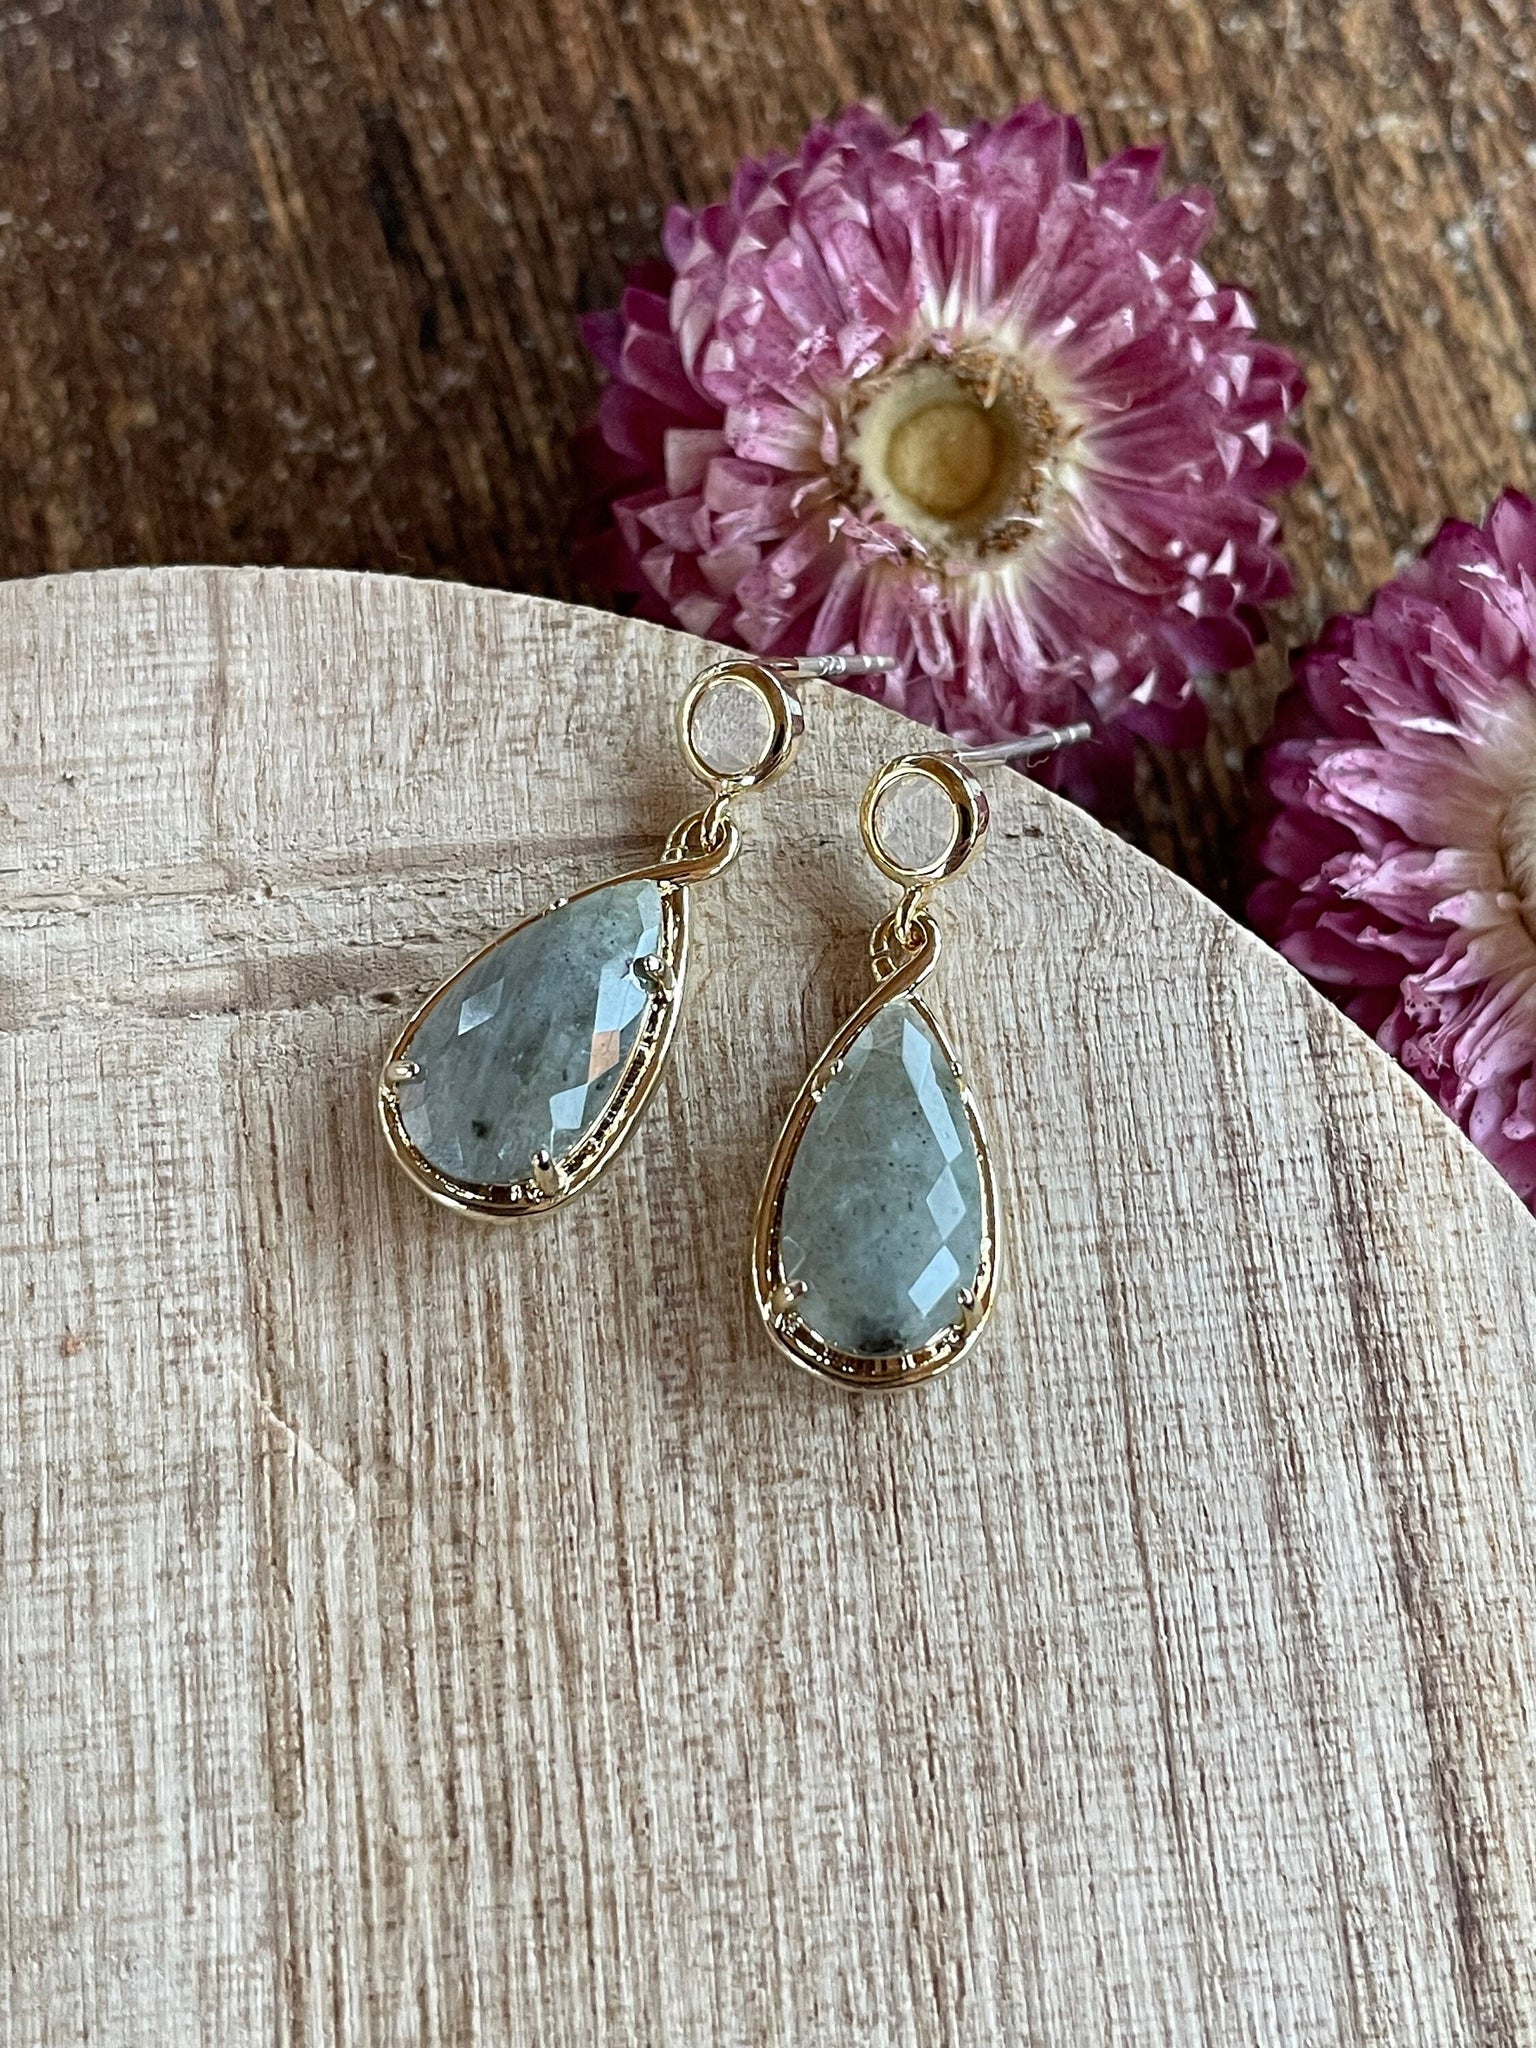 labradorite earrings, gift, gift for her, gold earrings, hypoallergenic, earrings, gold jewelry, holiday, valentines day, labradorite